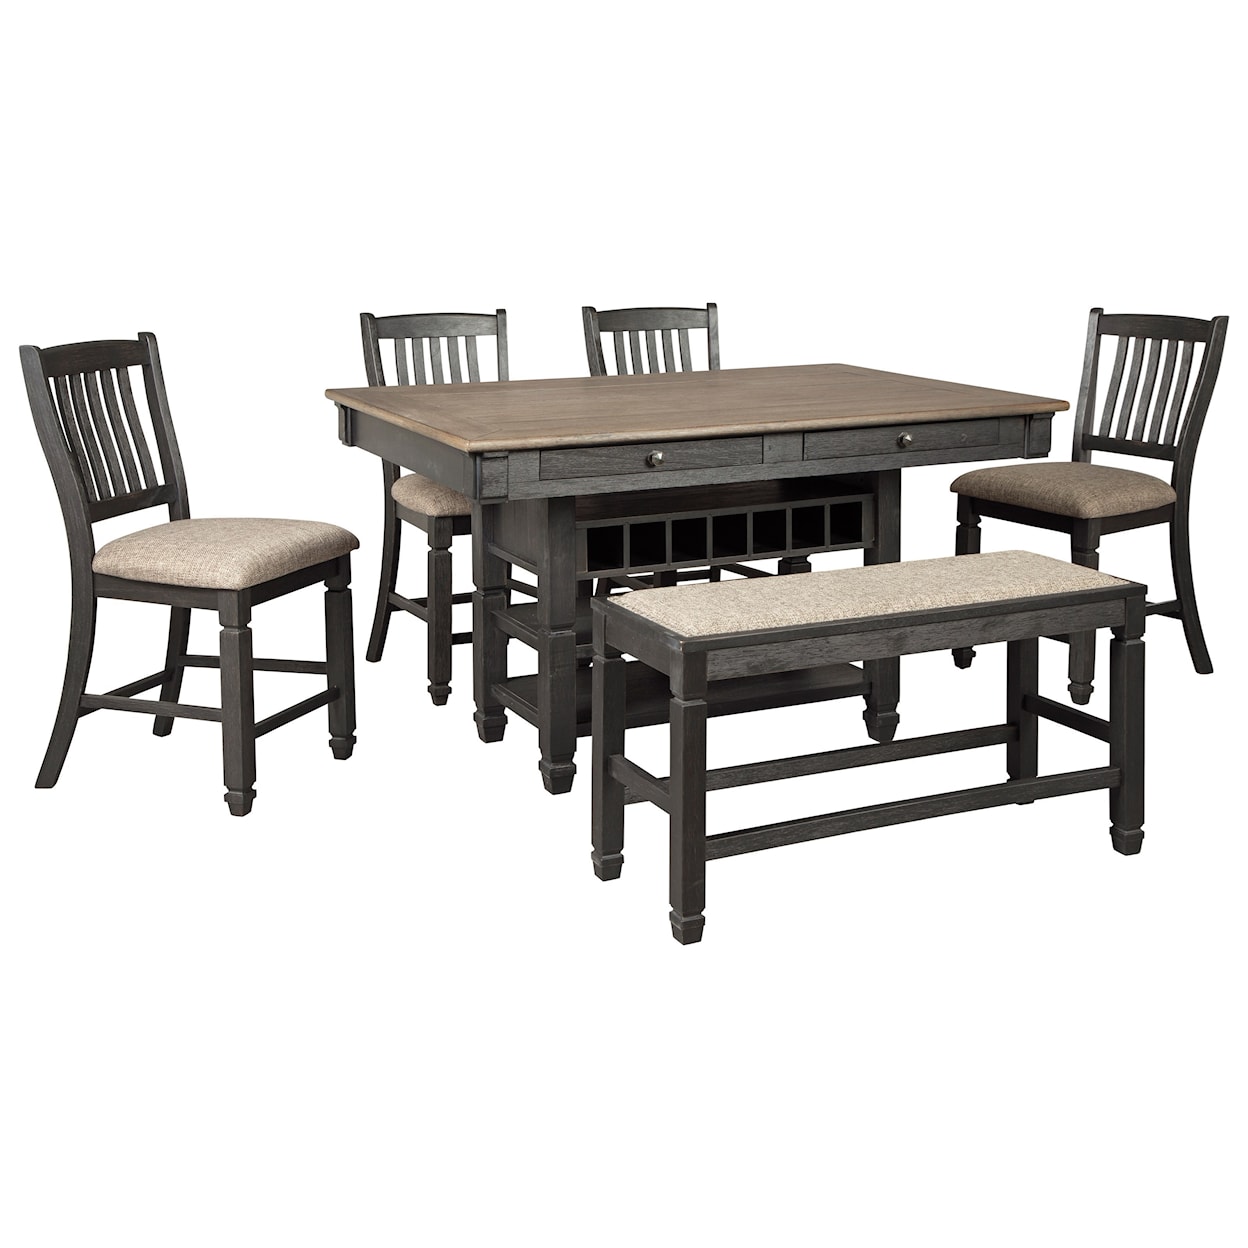 Michael Alan Select Tyler Creek 6-Piece Counter Table Set with Bench